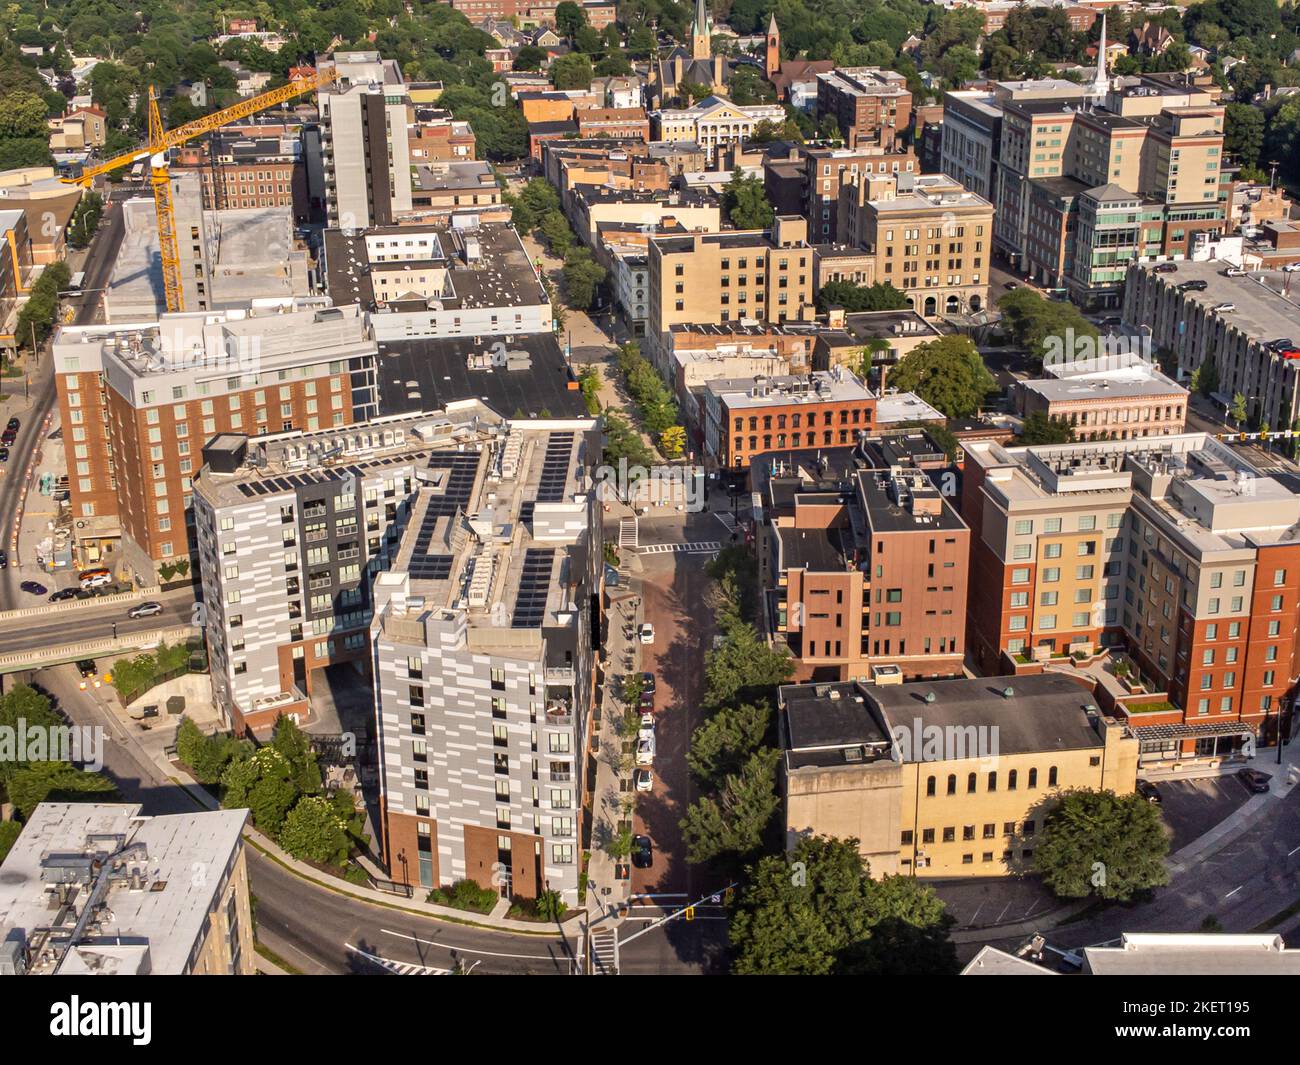 June 26 2022, Early morning aerial summer image of the area surrounding the City of Ithaca, NY, USA Stock Photo